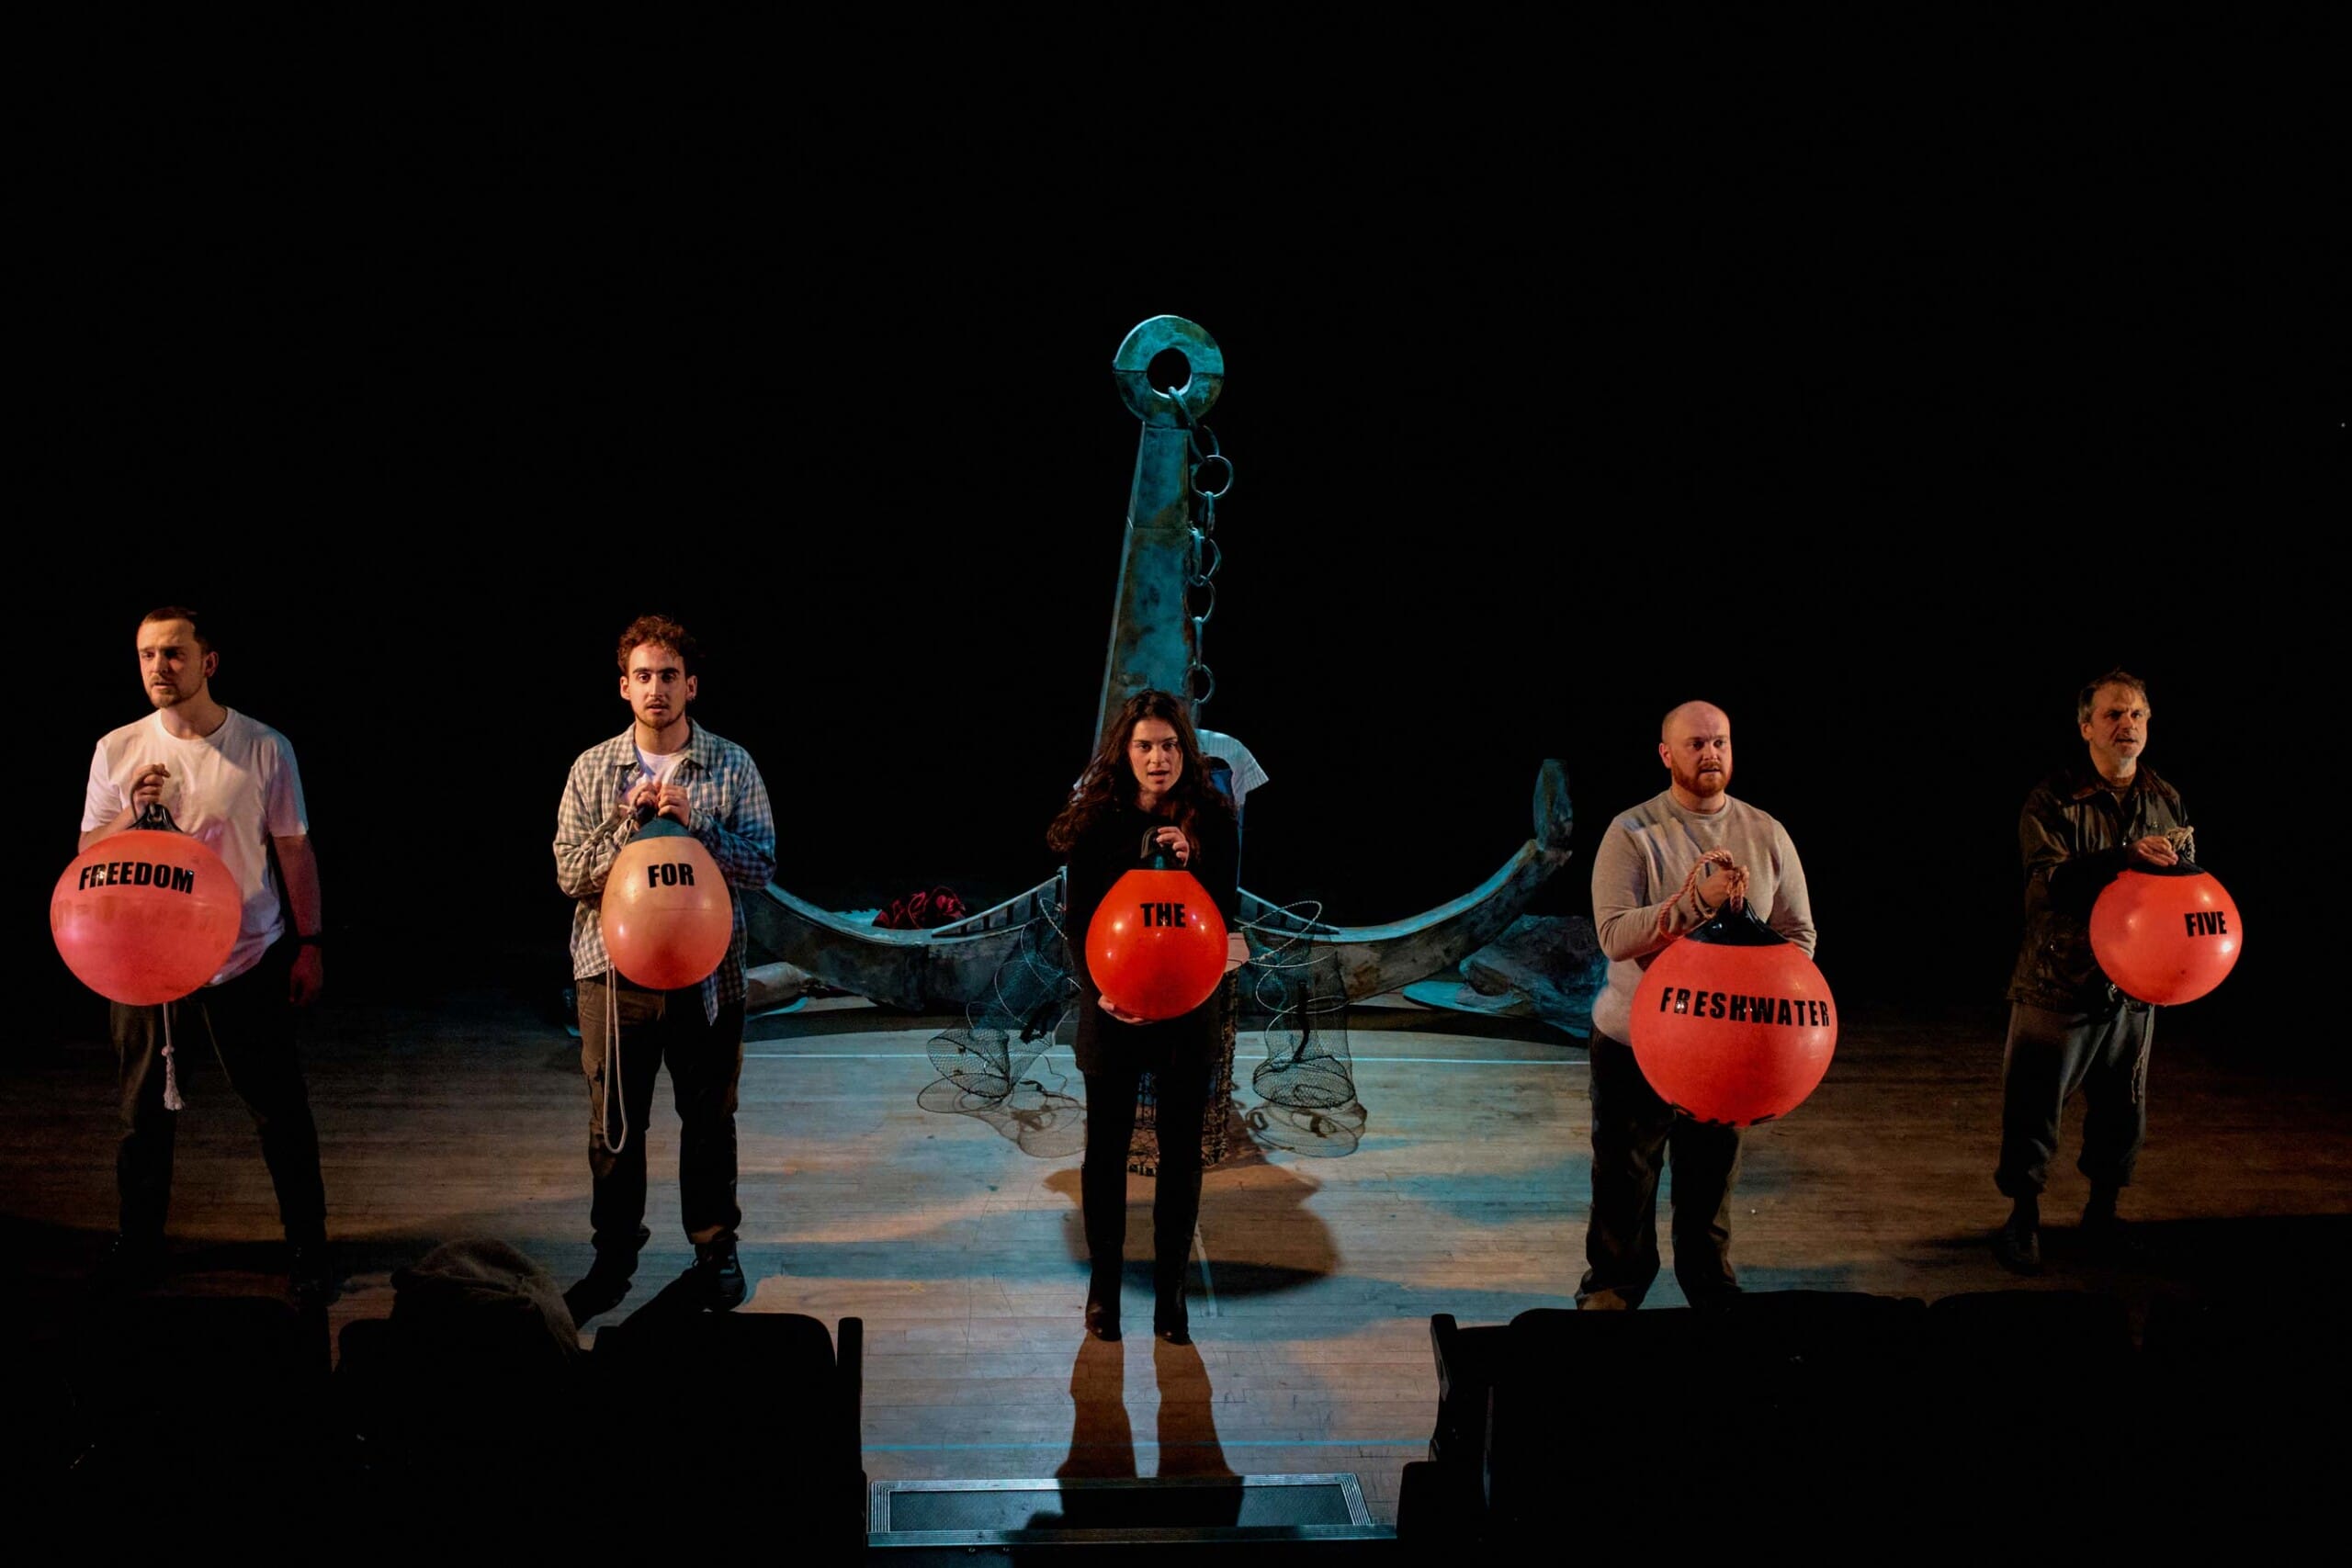 Performers on stage in The Freshwater Five - they stand in a line holding orange buoys on which black text reads Freedom for The Freshwater Five.